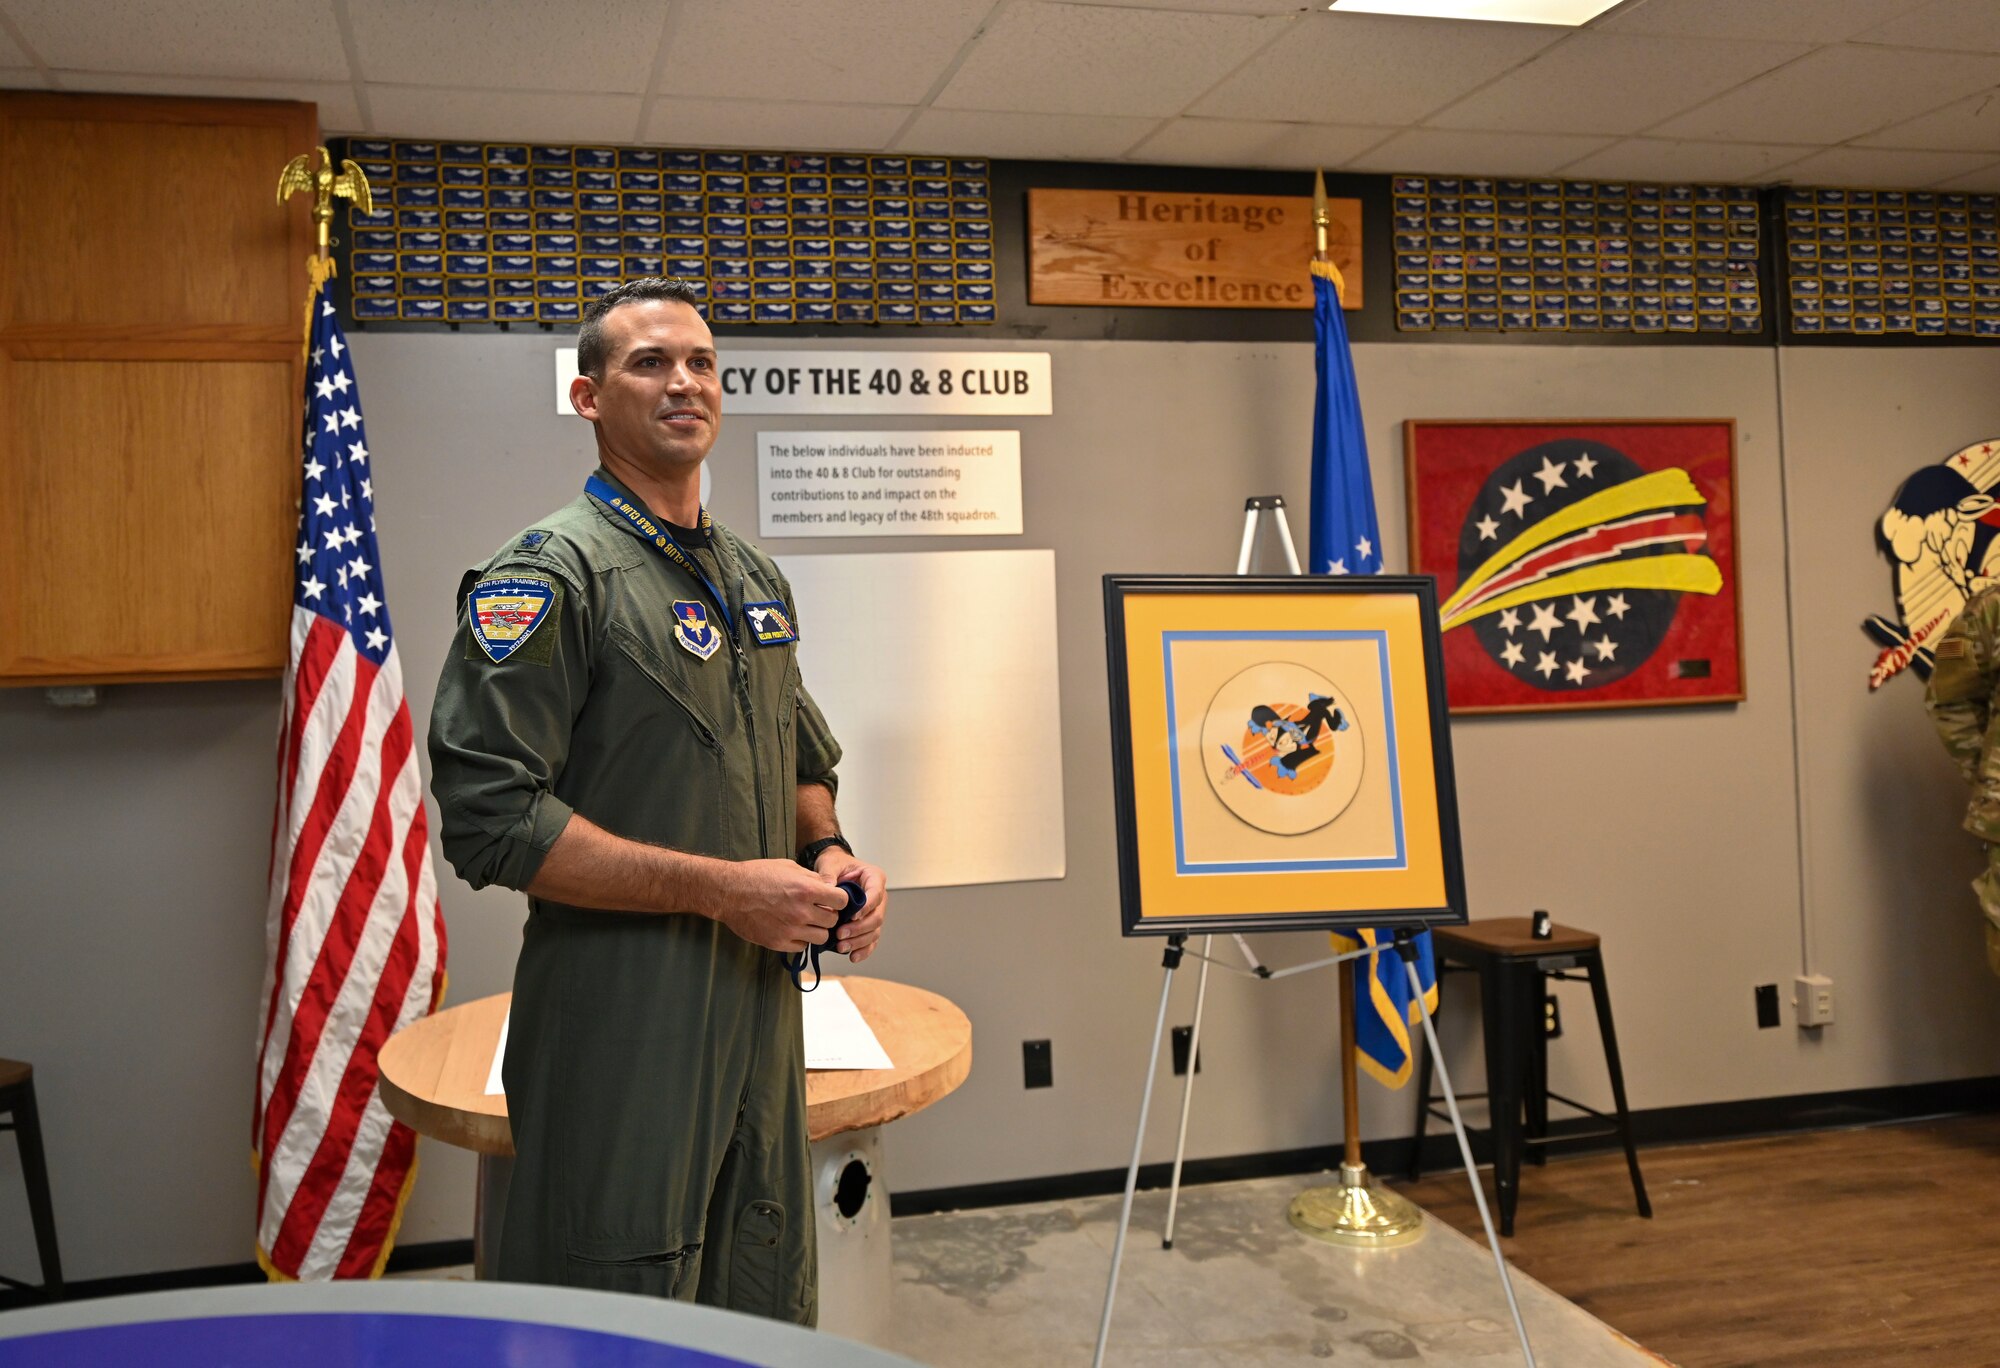 U.S. Air Force Lt. Col. Nelson Prouty, 48th Flying Training Squadron commander, speaks at the opening of their squadron’s heritage room Oct. 8, 2021, on Columbus Air Force Base, Miss. The tanker and airlift track of specialized undergraduate pilot training is conducted by the 48th Flying Training Squadron. (U.S. Air Force photo by Airman 1st Class Jessica Haynie)